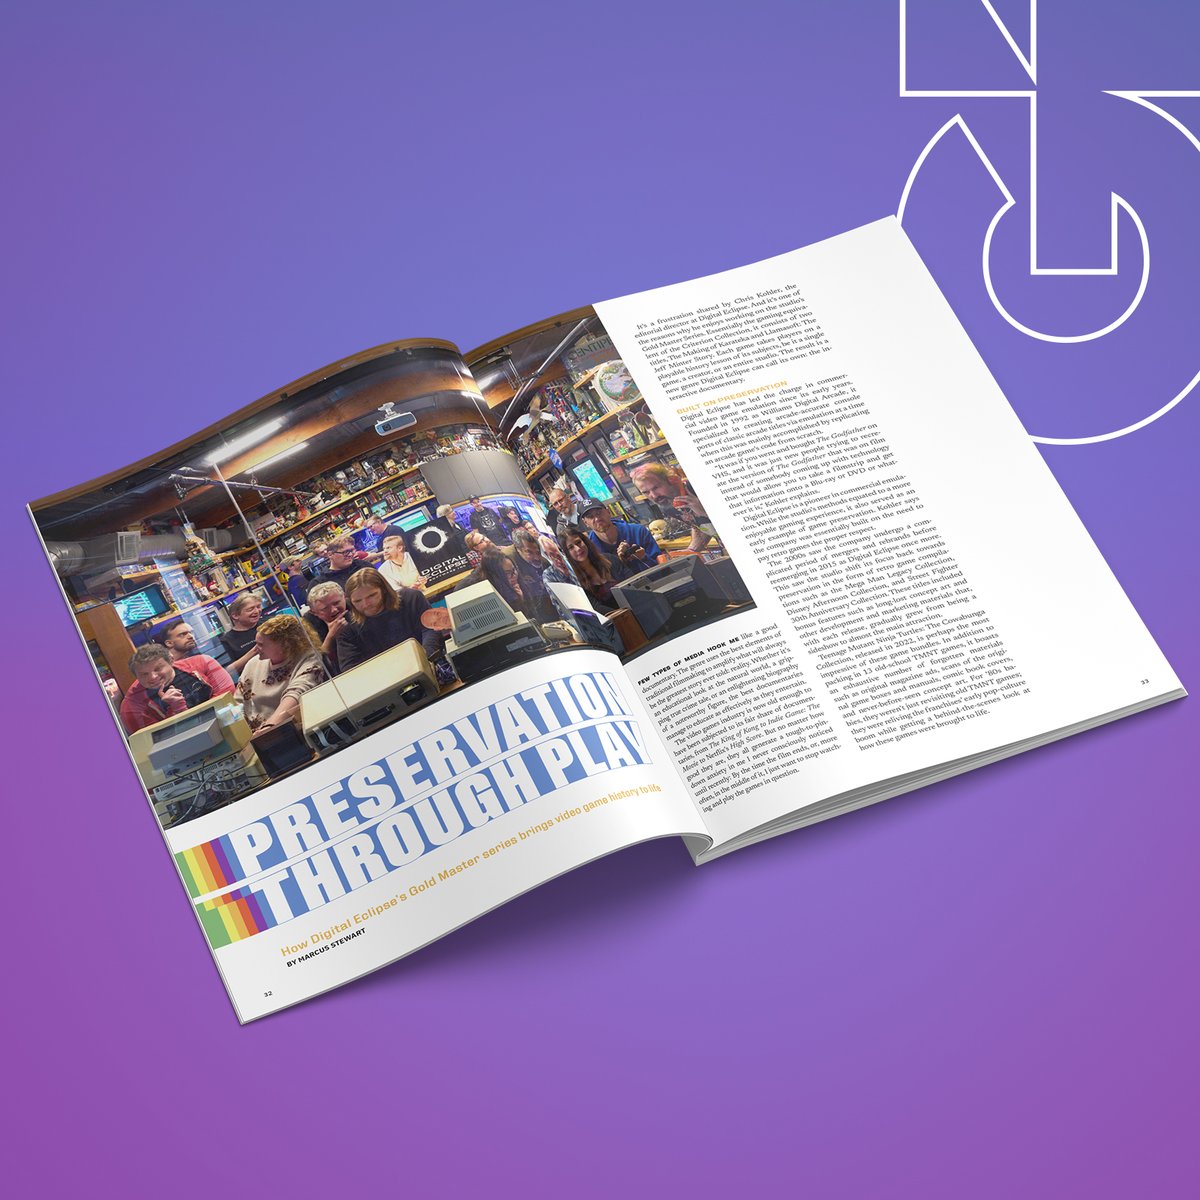 Our most recent issue went in-depth with Digital Eclipse and that team's efforts to chronicle gaming history through interactive experiences. Celebrate the history of gaming with us through a subscription to the magazine for only $19.91 for the whole year. subscription.gameinformer.com